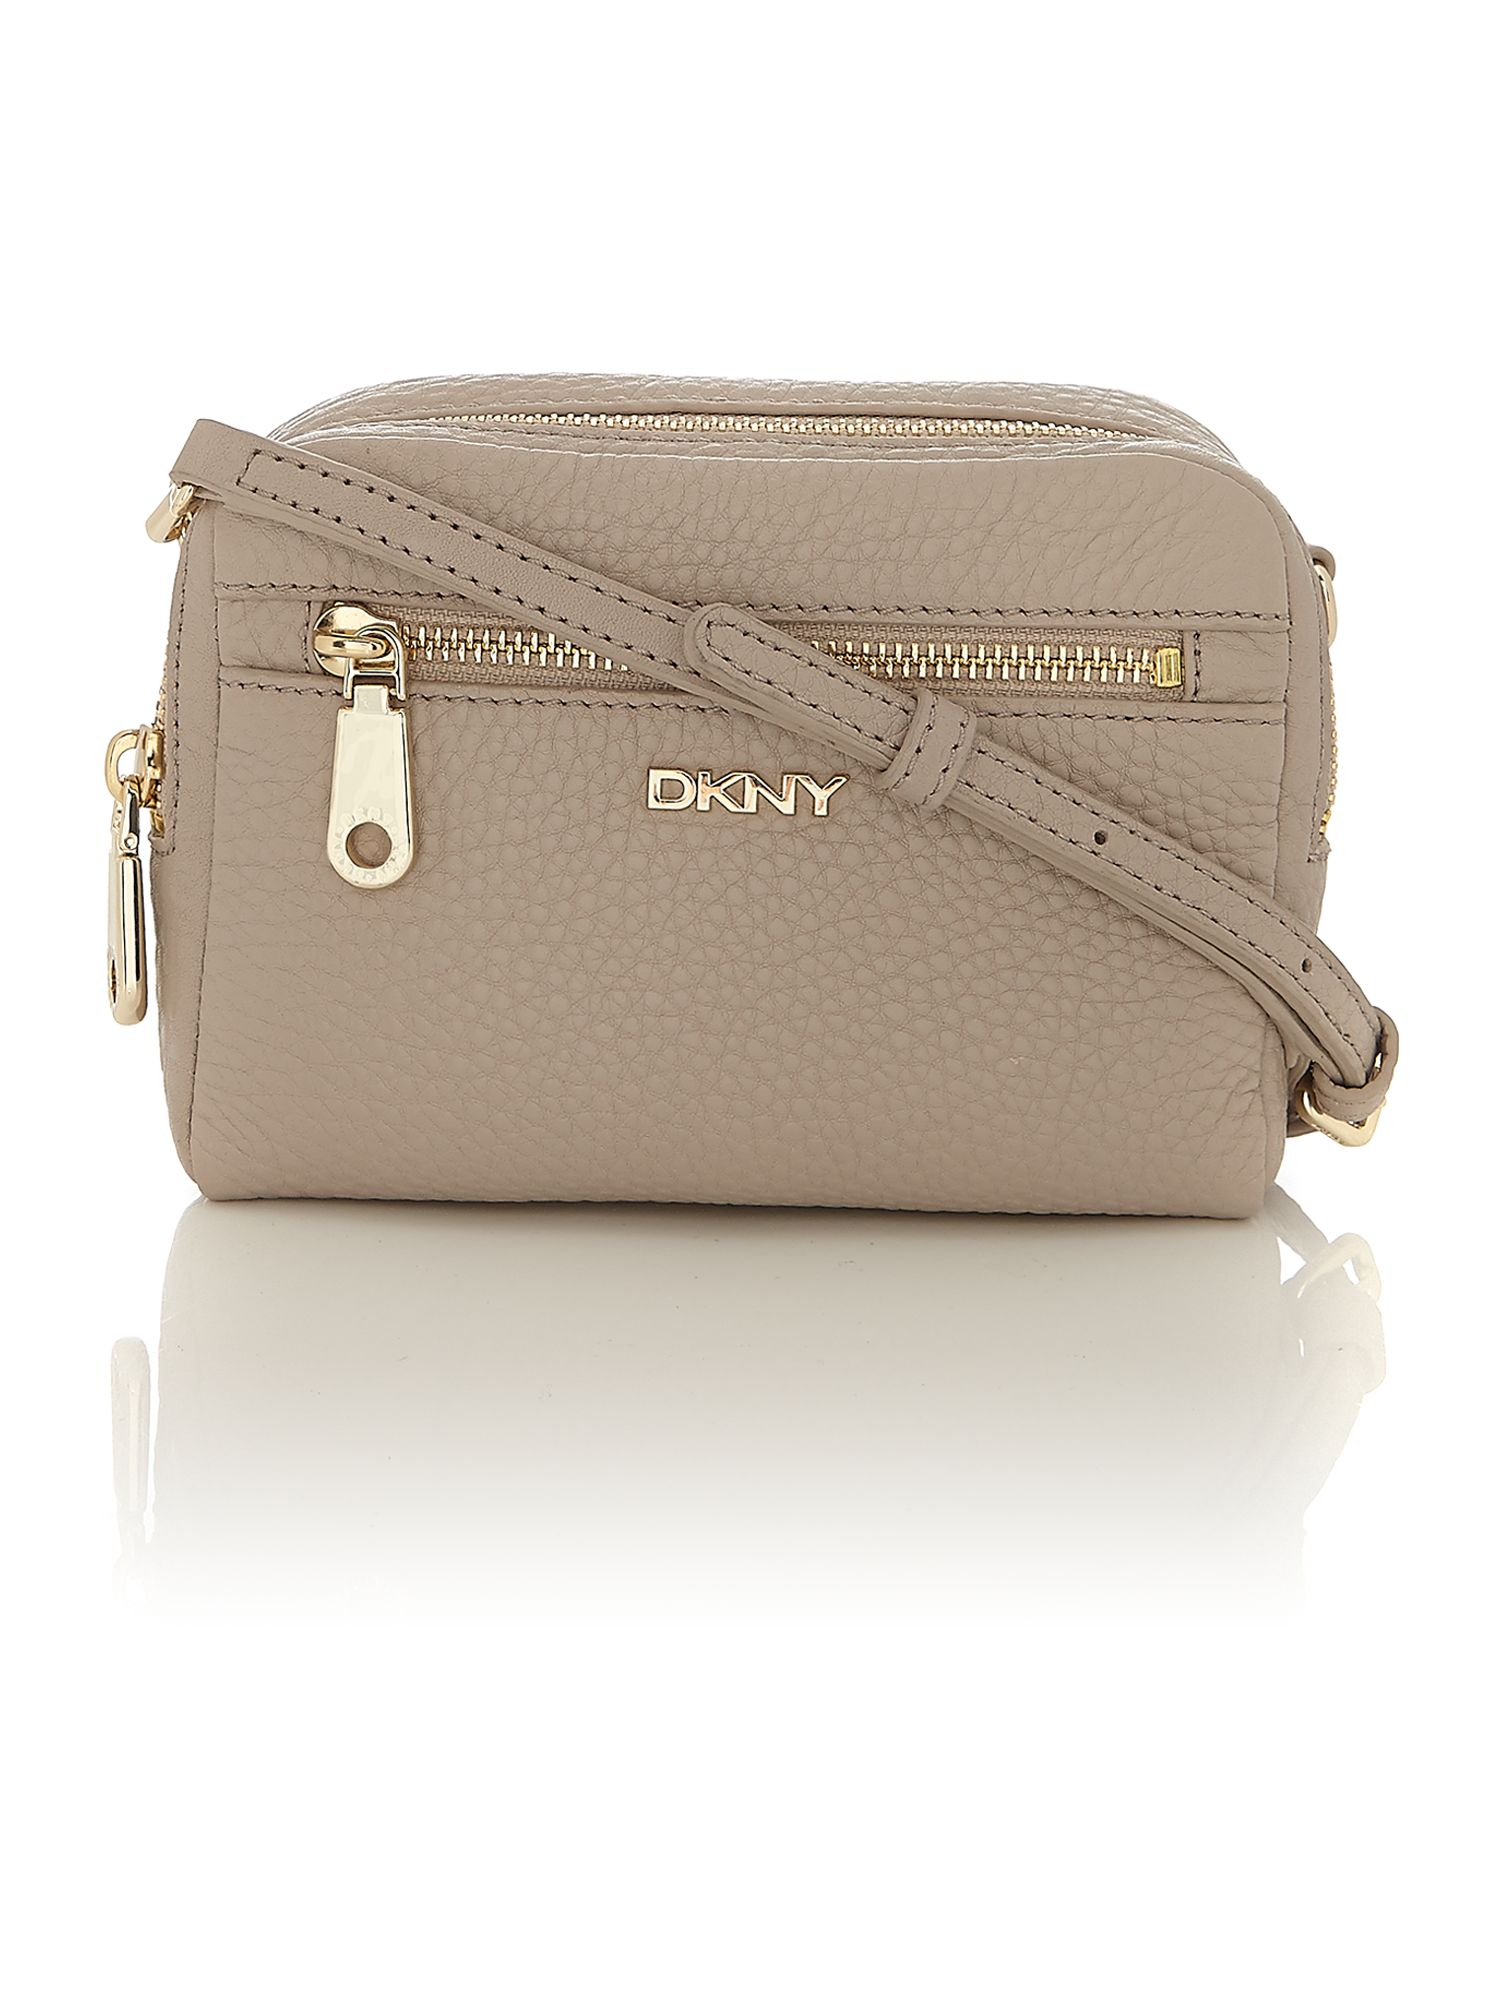 Dkny Tribeca Taupe Small Cross Body Bag in Brown (Taupe)